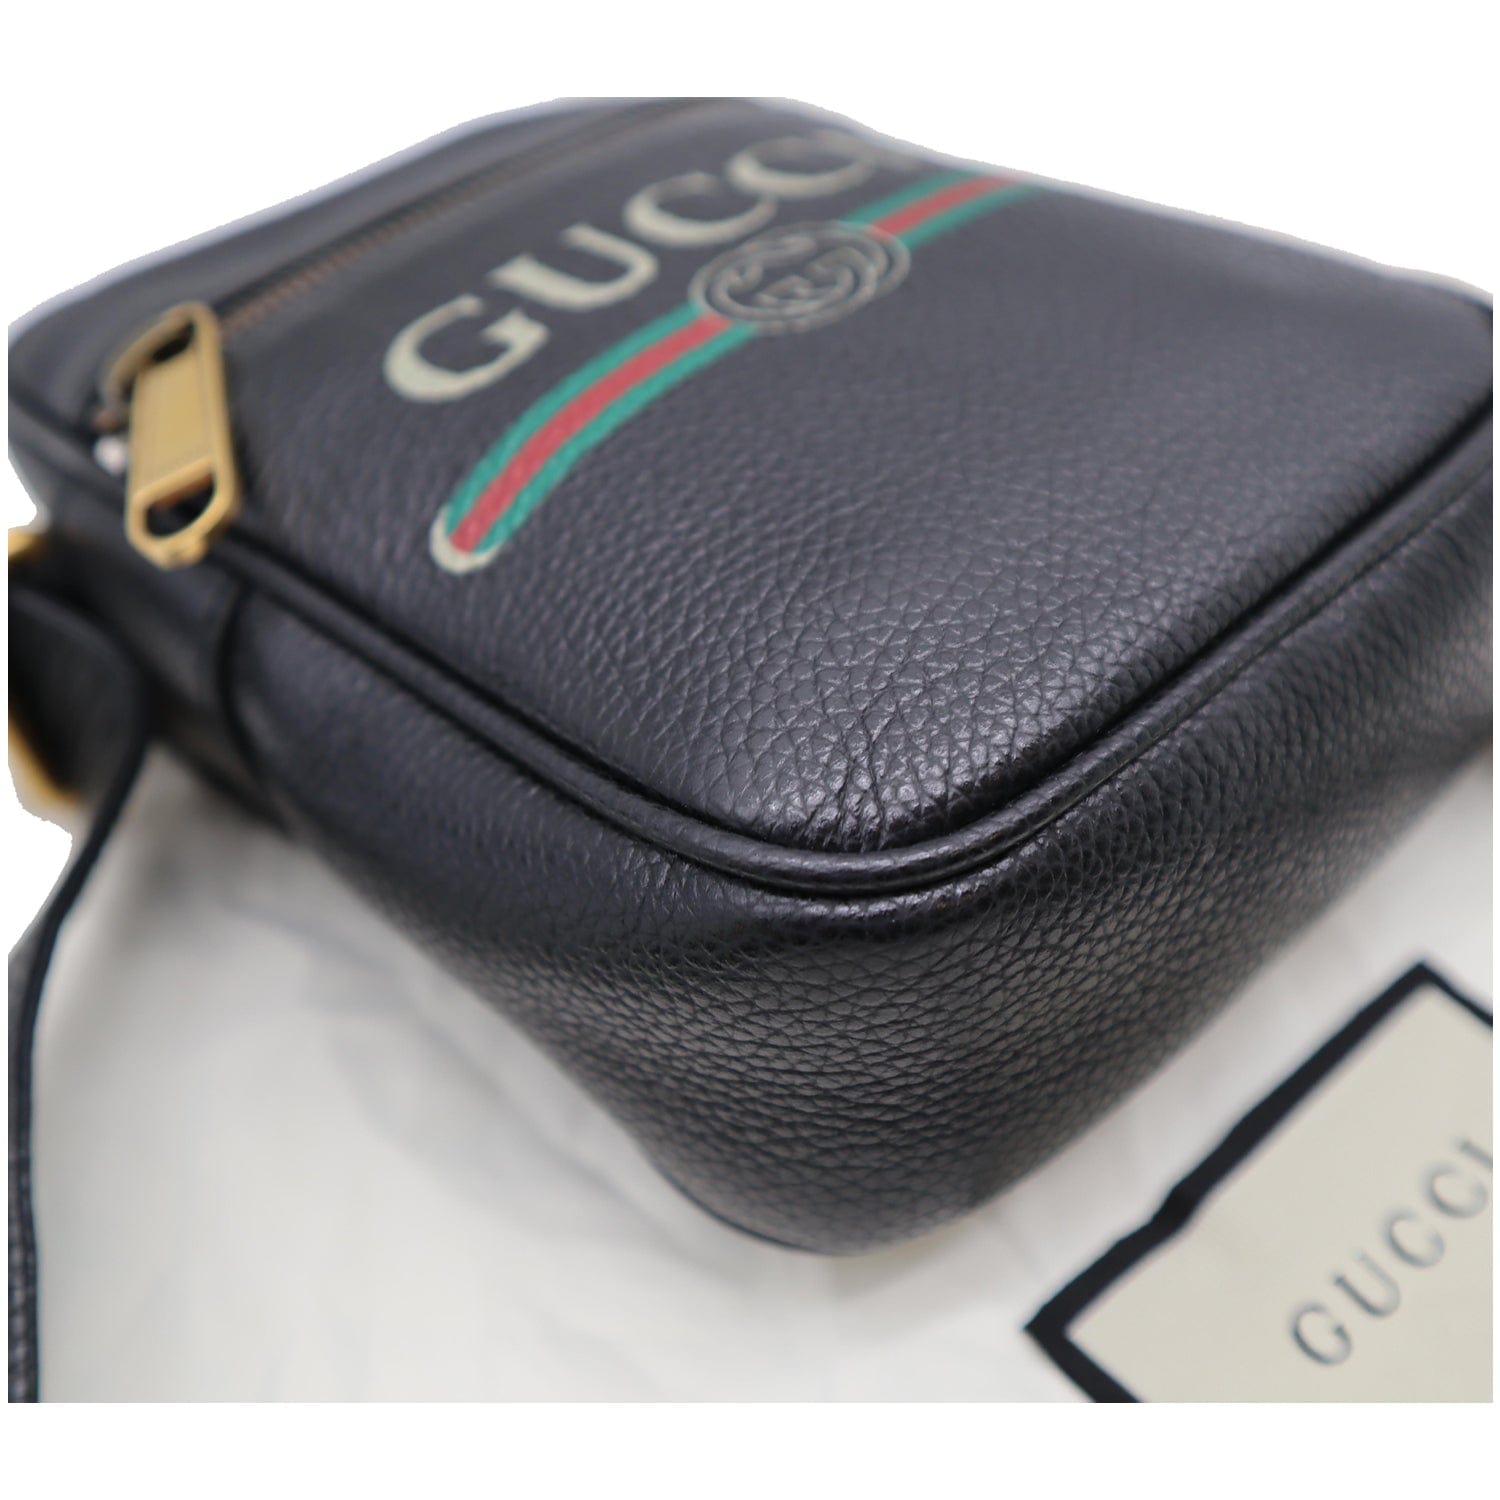 NEW Gucci “Vintage” Logo GG Print Grained Leather Messenger